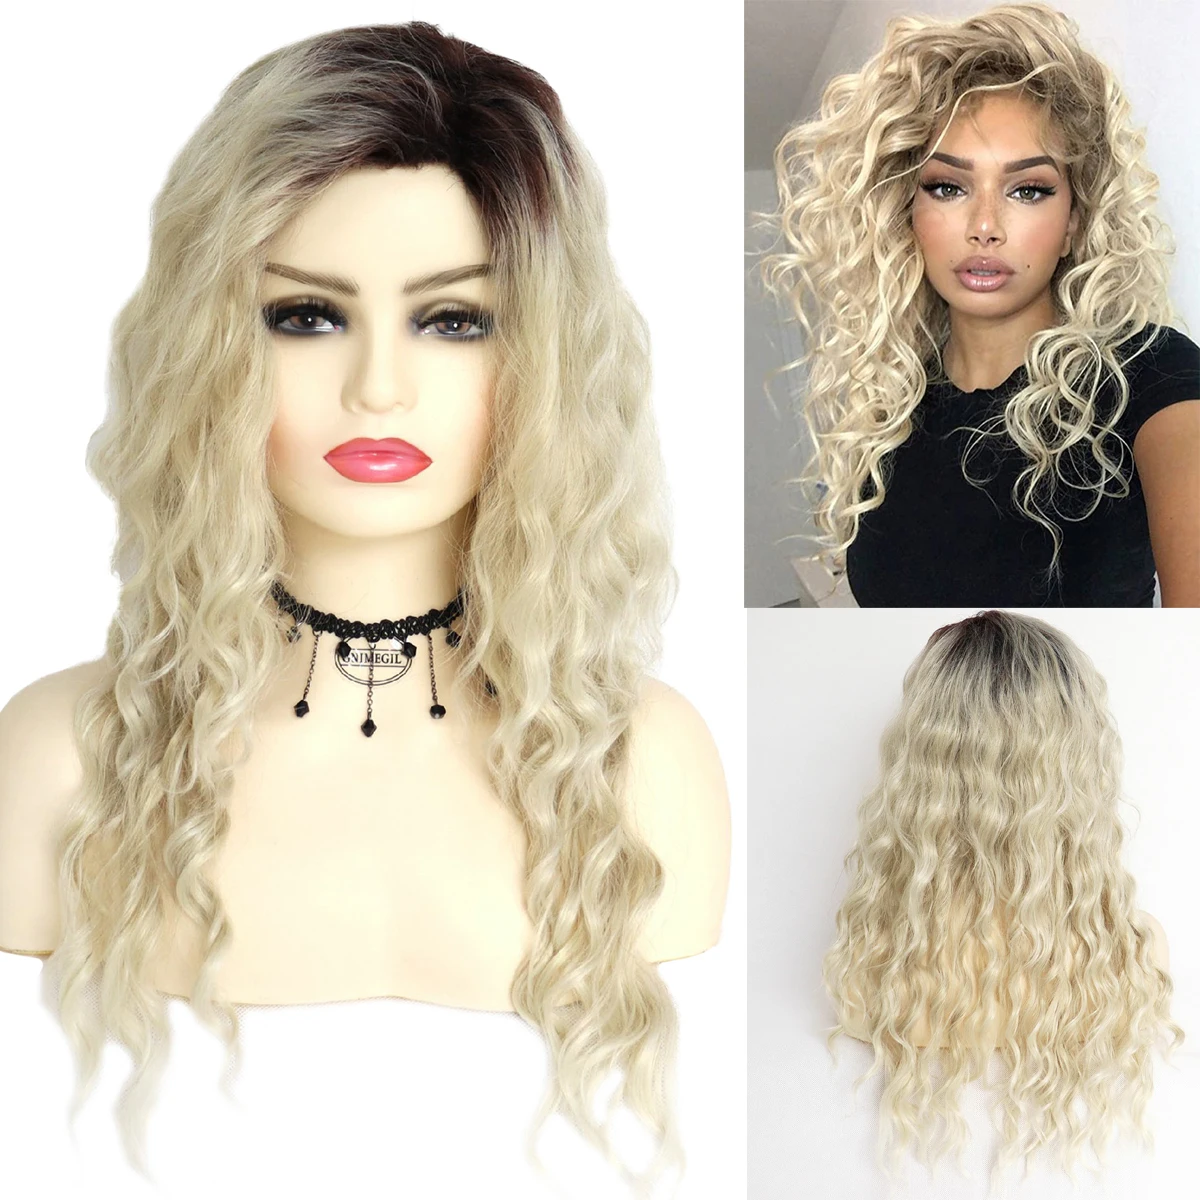 

GNIMEGIL Long Curly Wigs for Women Synthetic Ombre Blonde Wig with Bangs Costume Wig for Girls Sexy Blond Wigs with Dark Roots